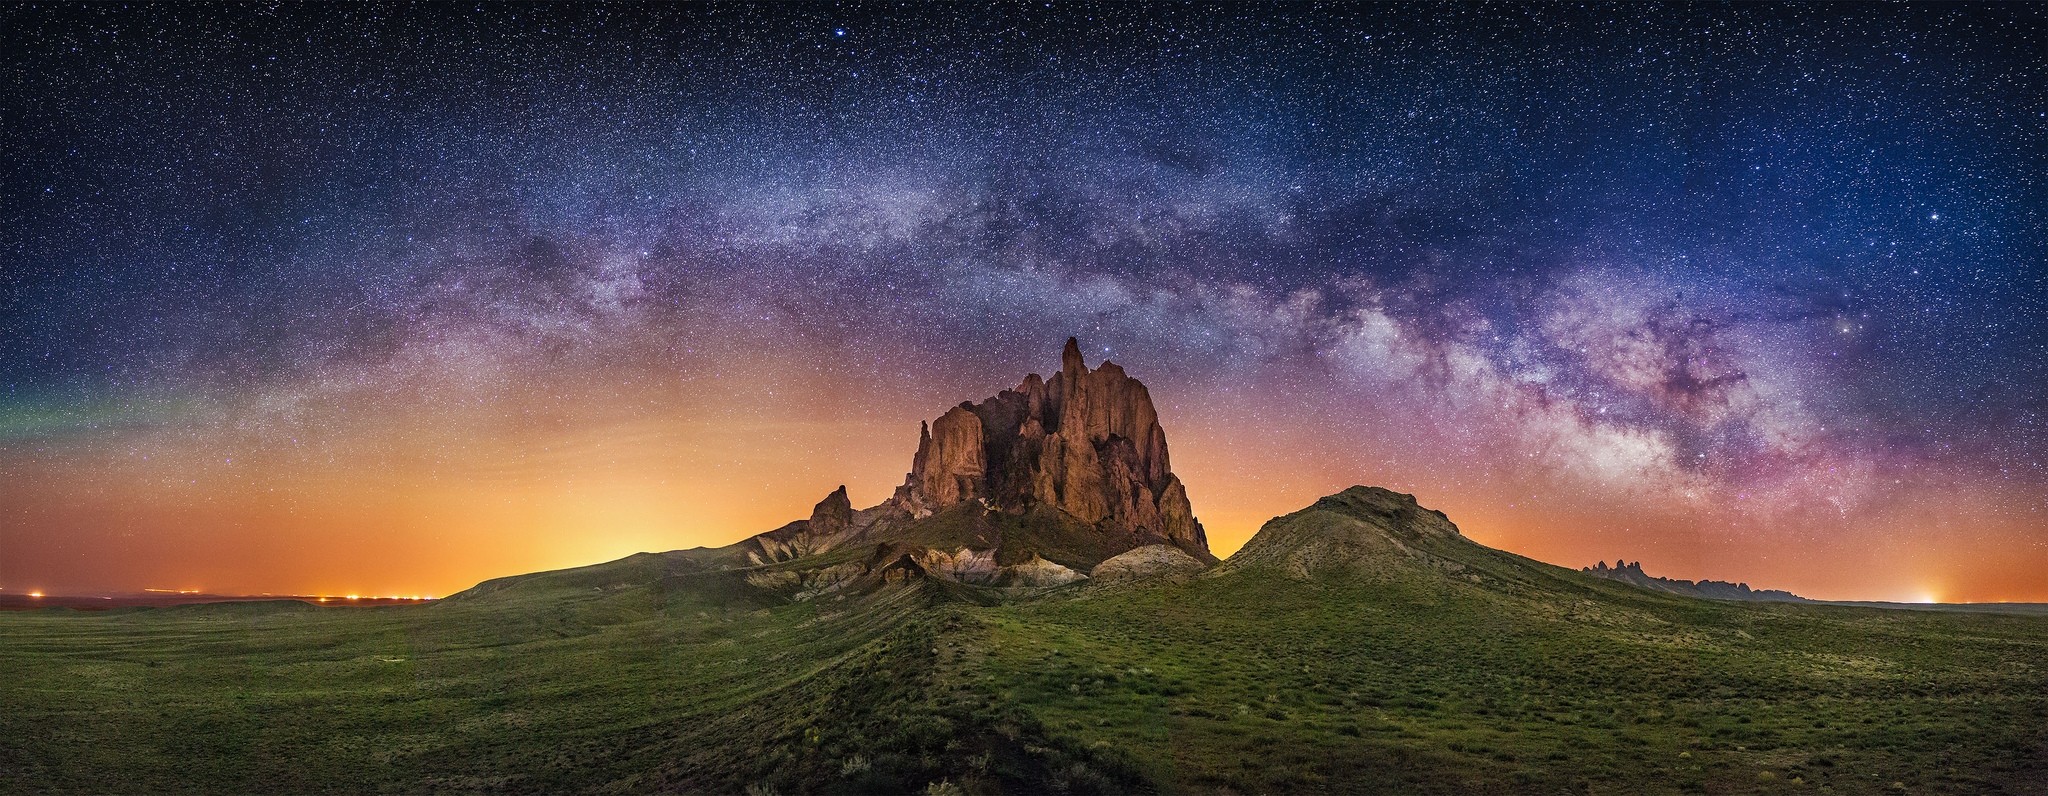 General 2048x796 nature photography landscape Milky Way starry night rocks lights galaxy long exposure New Mexico